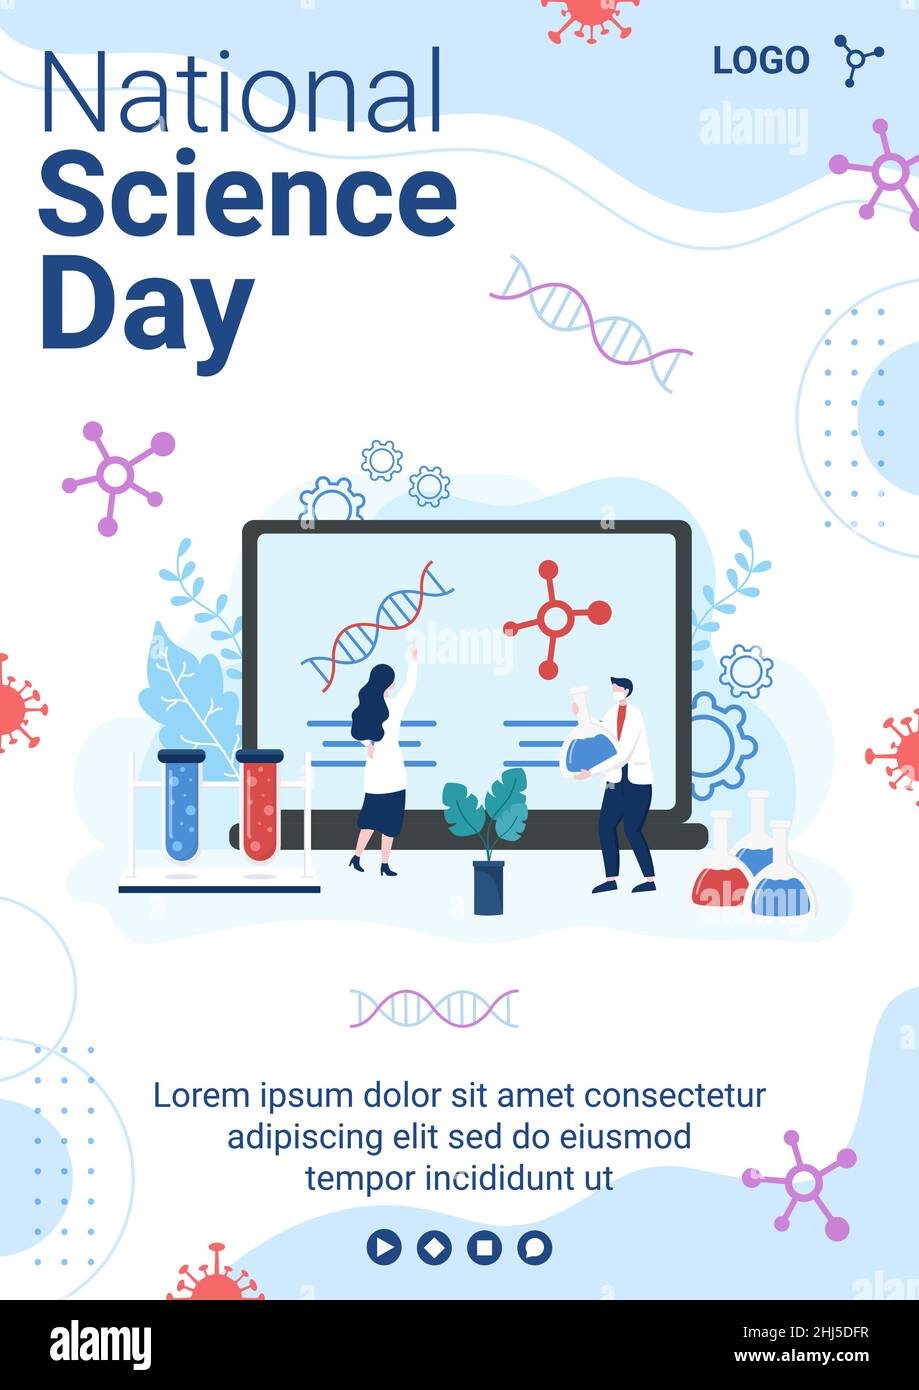 National Science Day Flyer Template Flat Design Illustration Editable of Square Background Suitable for Social Media or Greeting Card Stock Vector